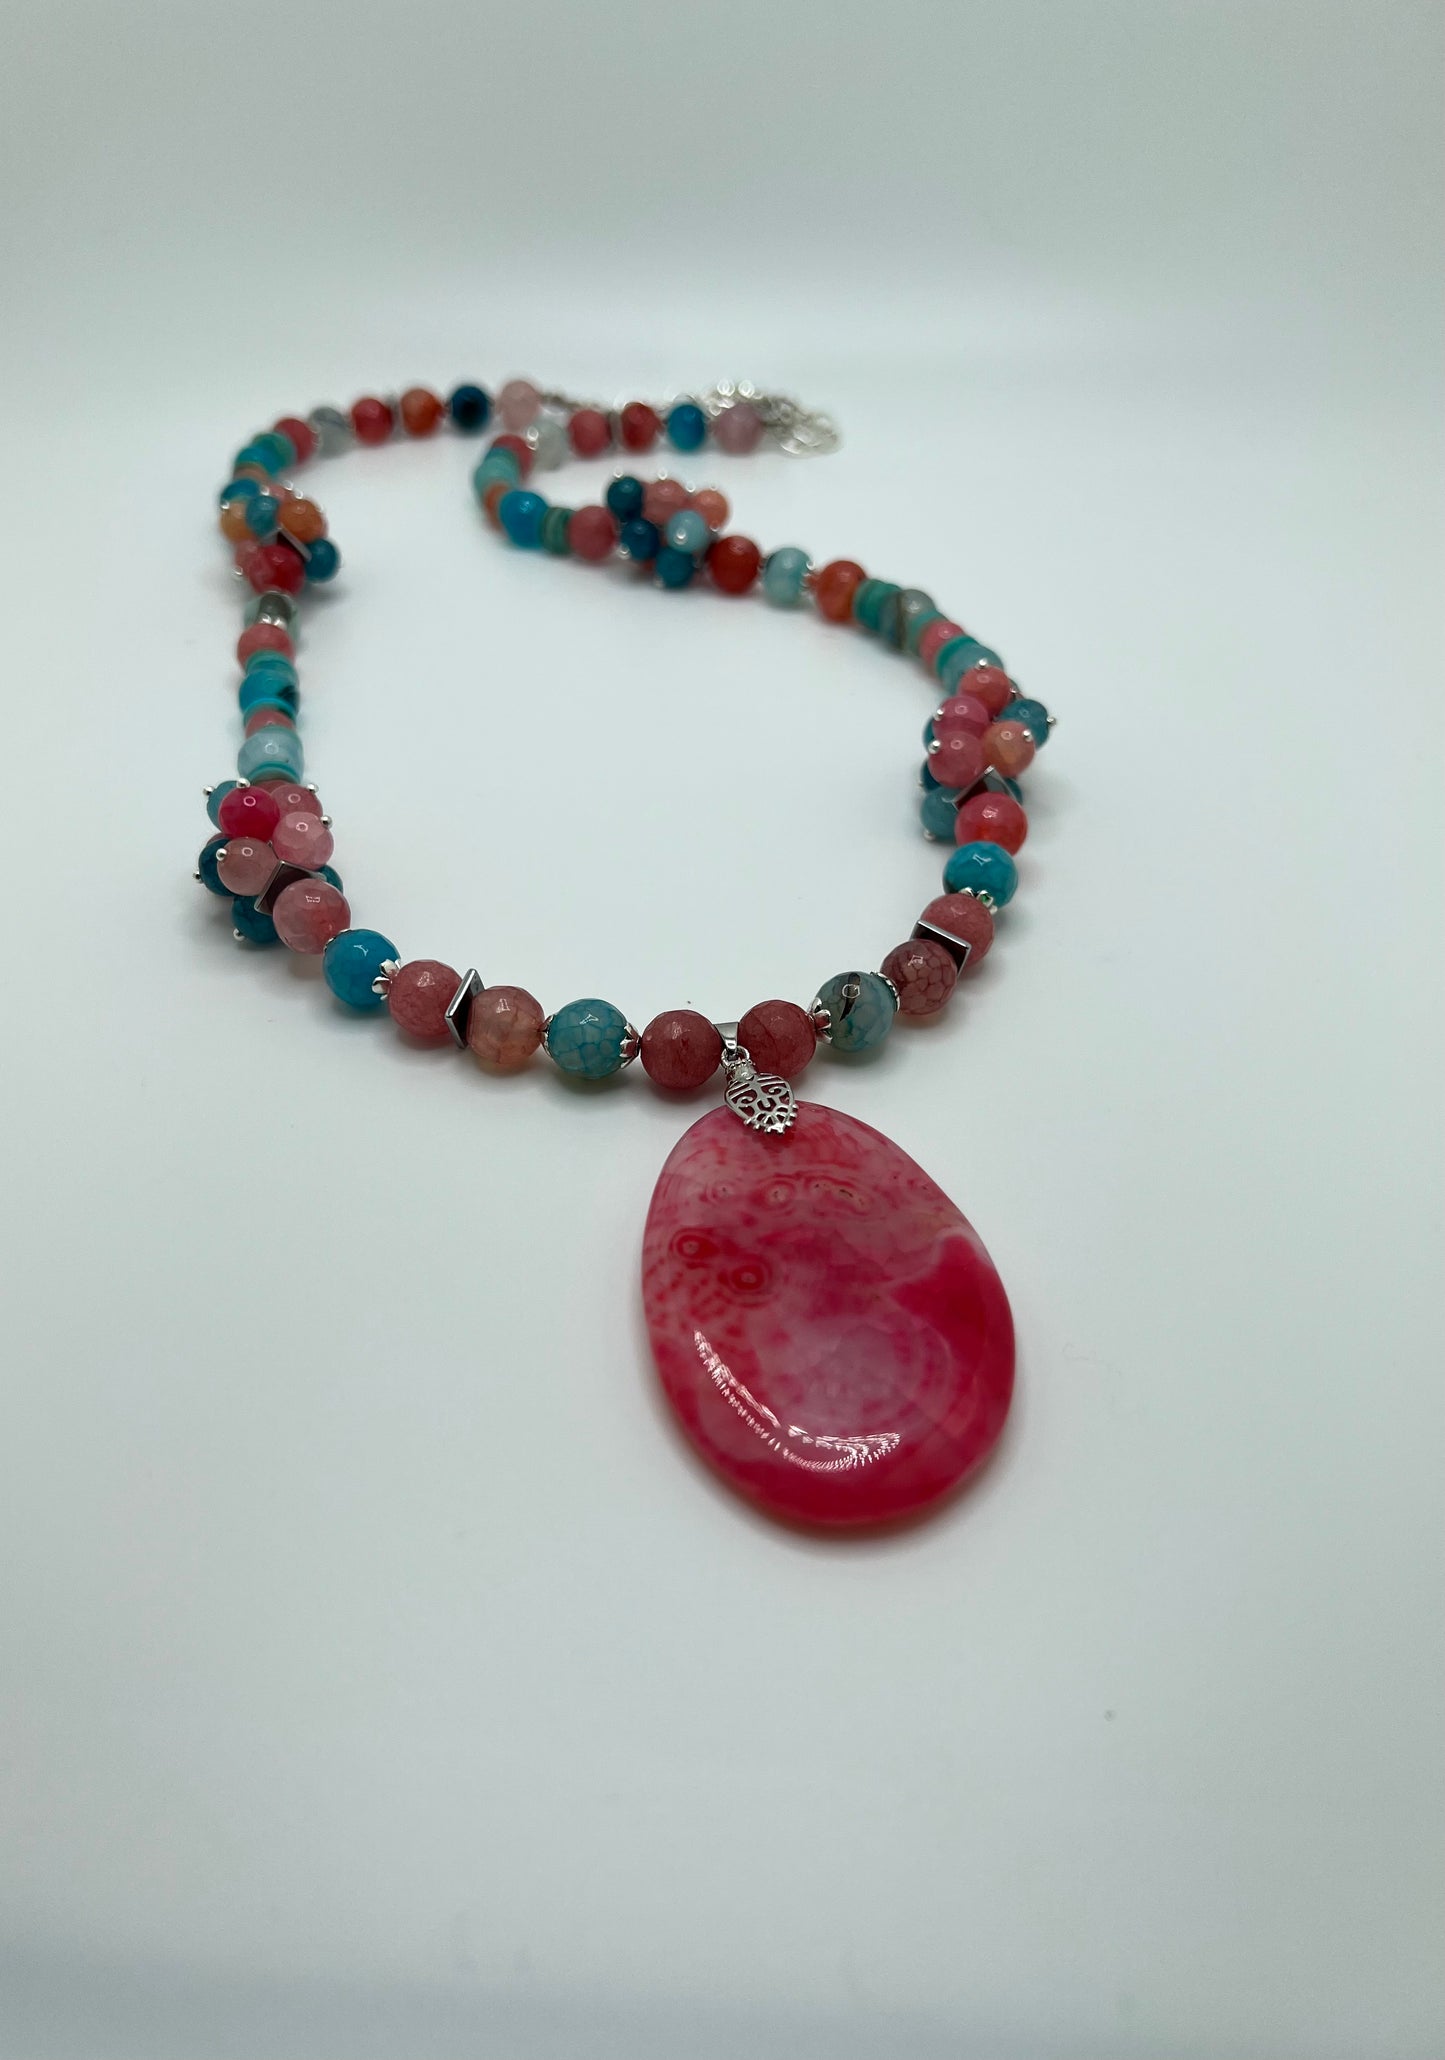 Natural Turquoise with Pink Gemstone Necklace With Pink Agate Pendant